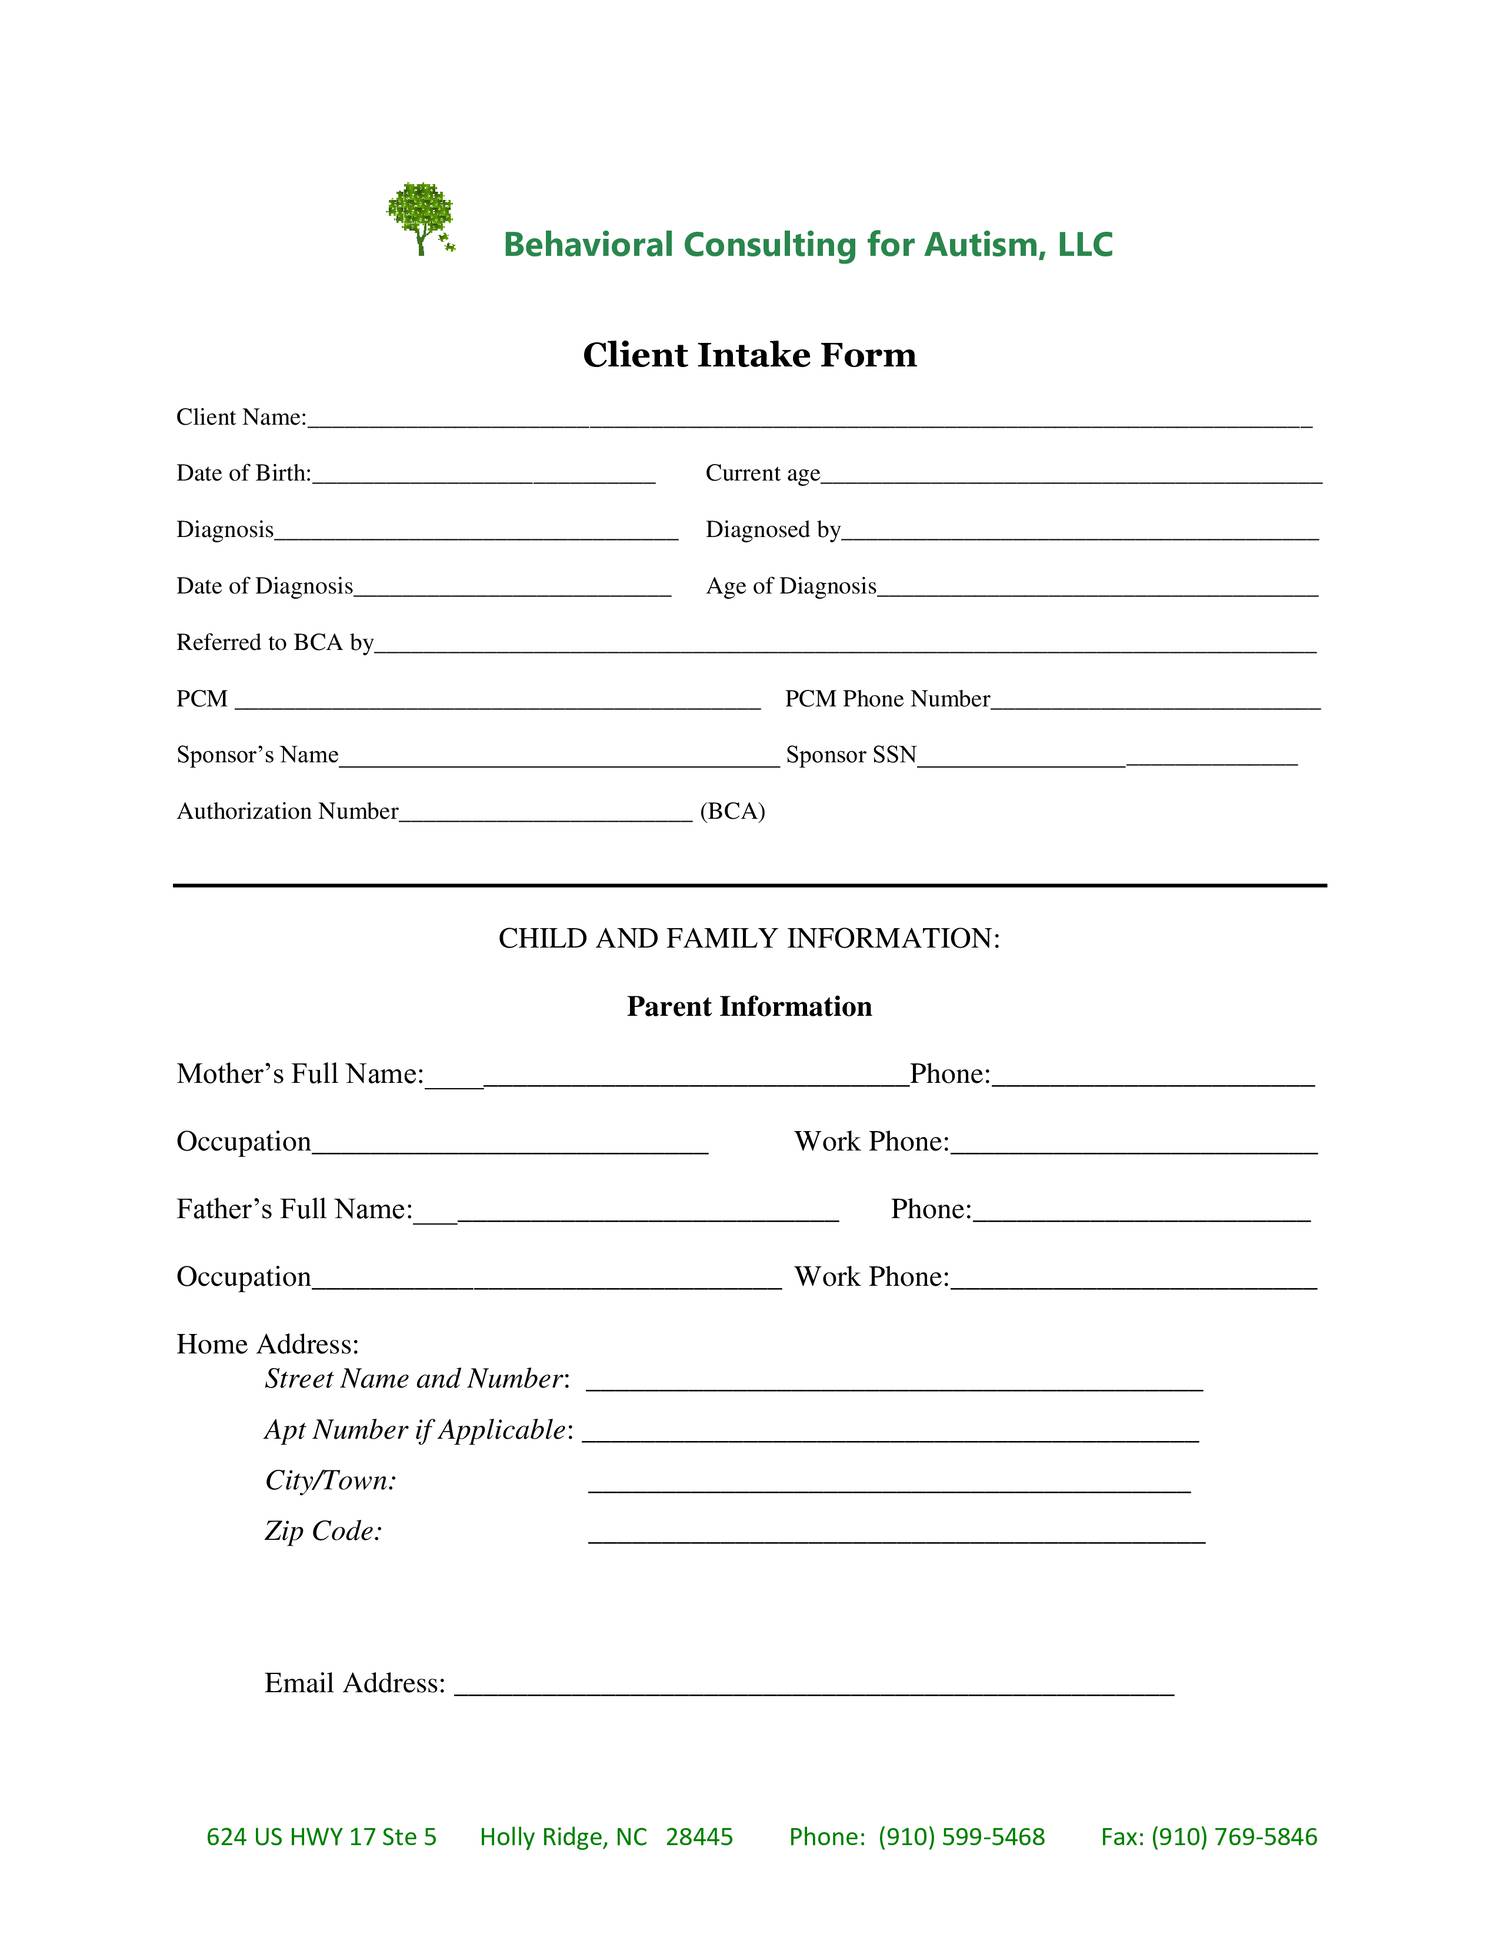 free-client-intake-form-template-printable-templates